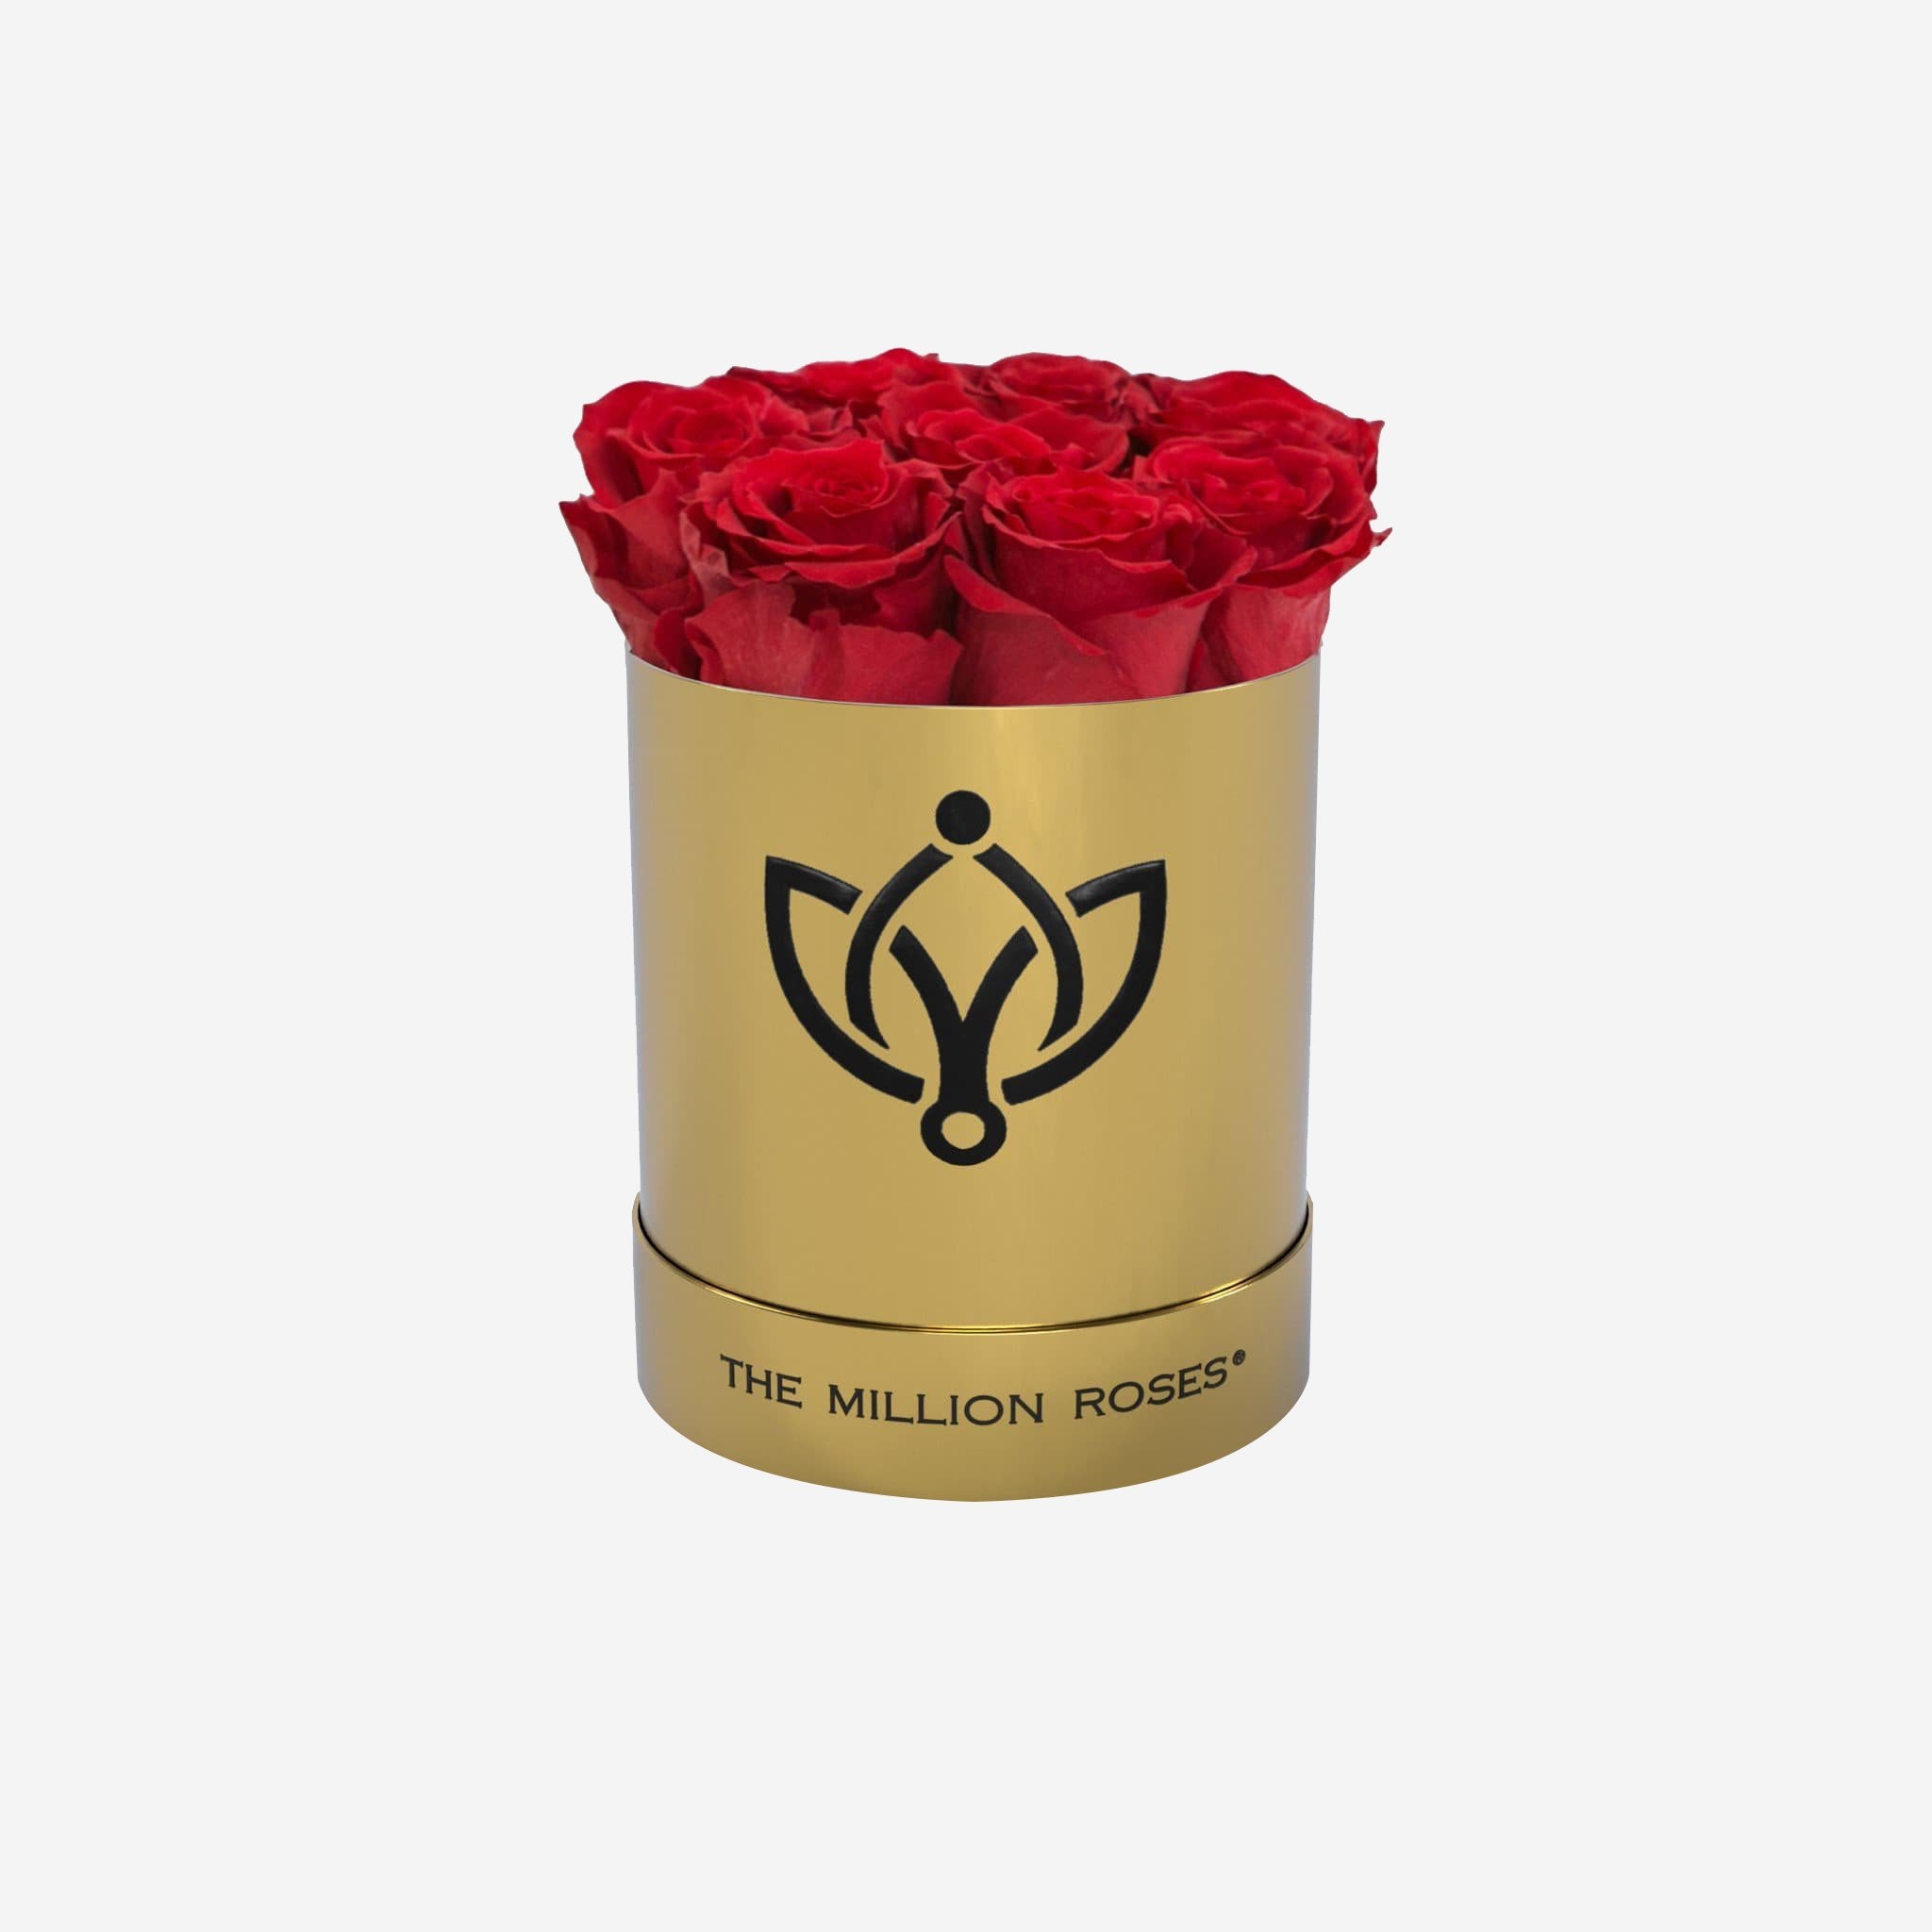 Basic Mirror Gold Box | Red Roses - The Million Roses